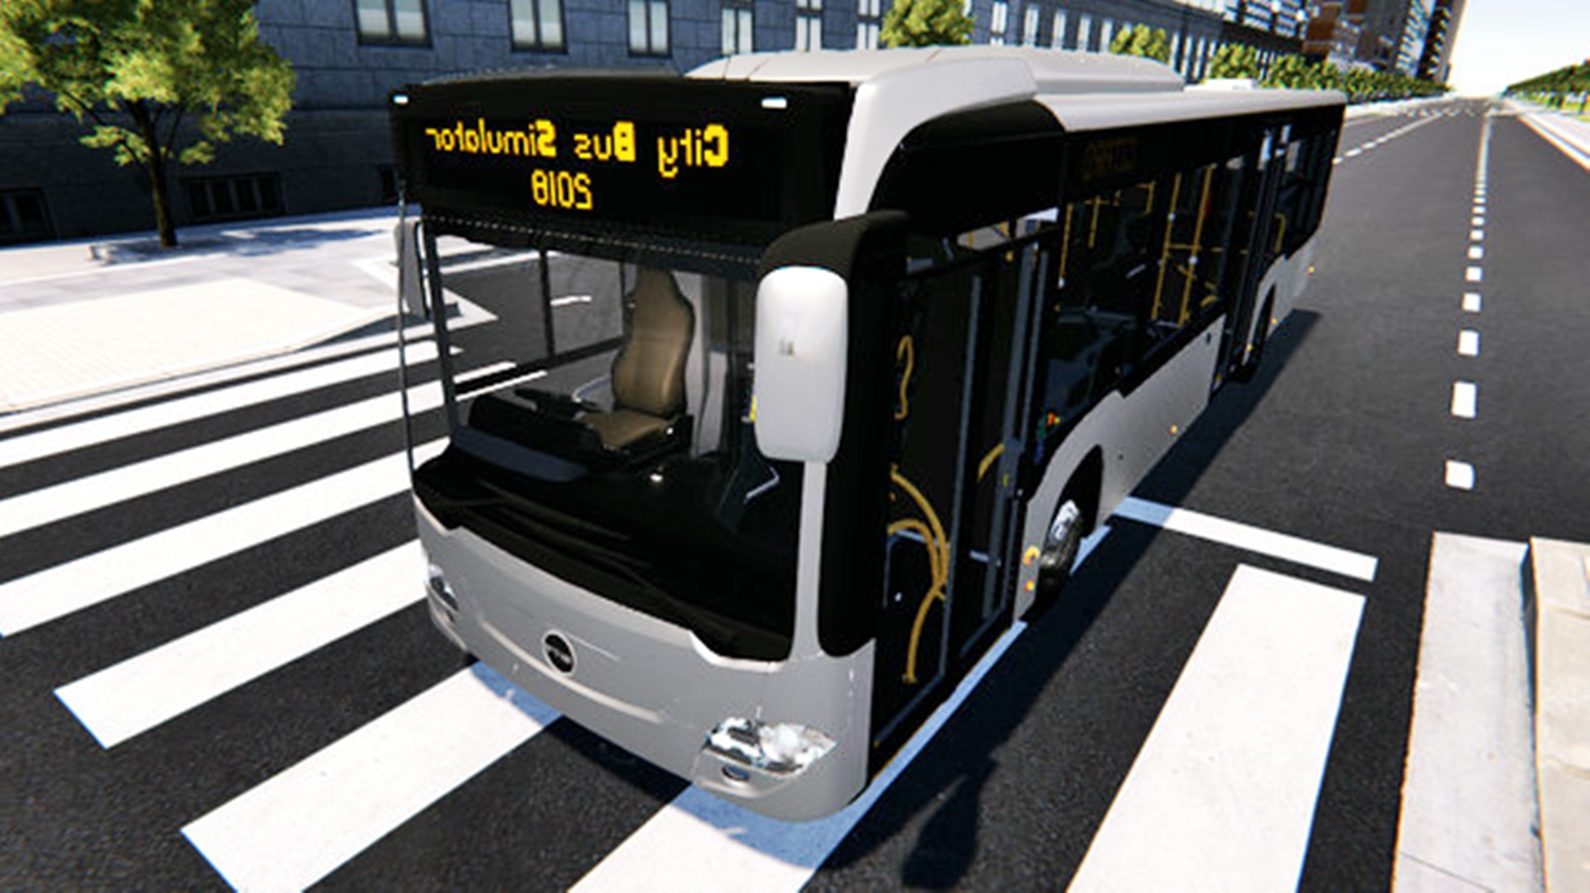 for ipod download City Bus Driving Simulator 3D